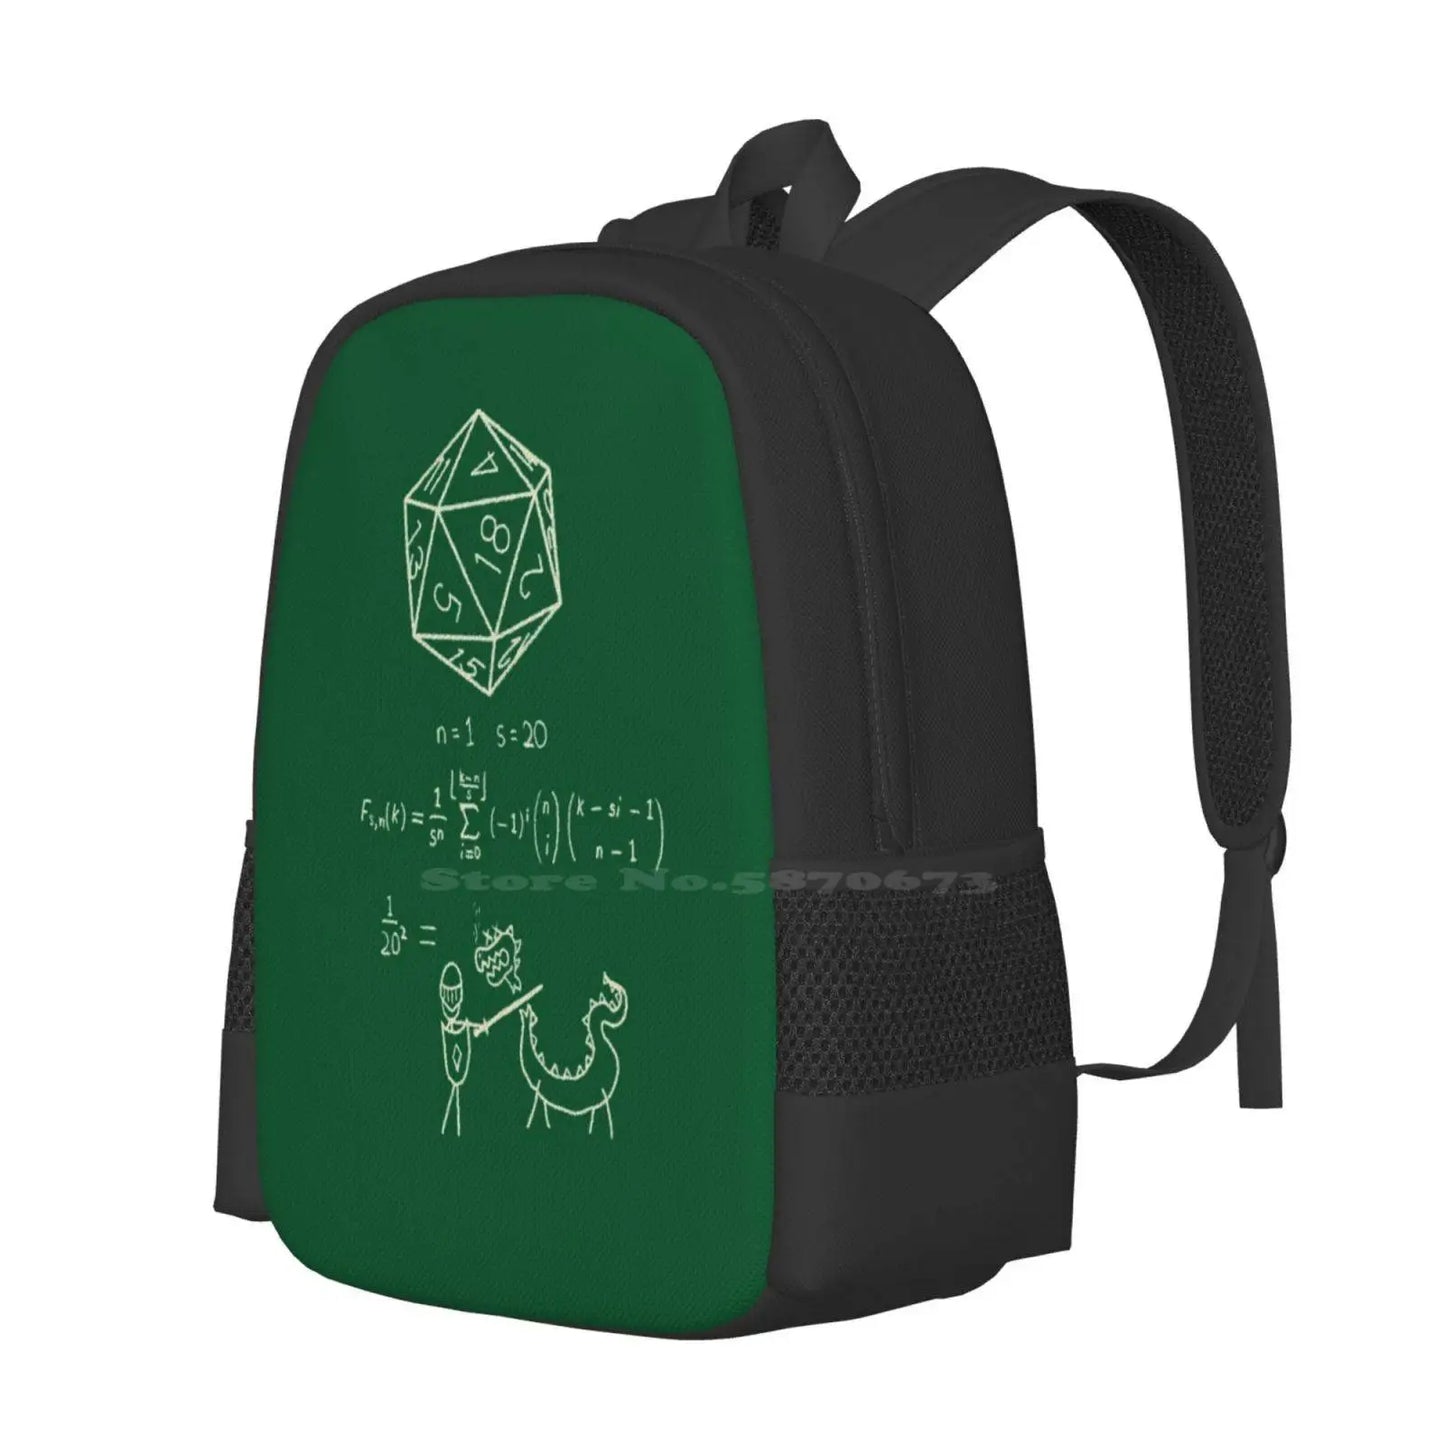 The Science Of 20 Sided Dice. School Bags Travel Laptop Backpack D20 Science Math Dice Dnd And Dragons